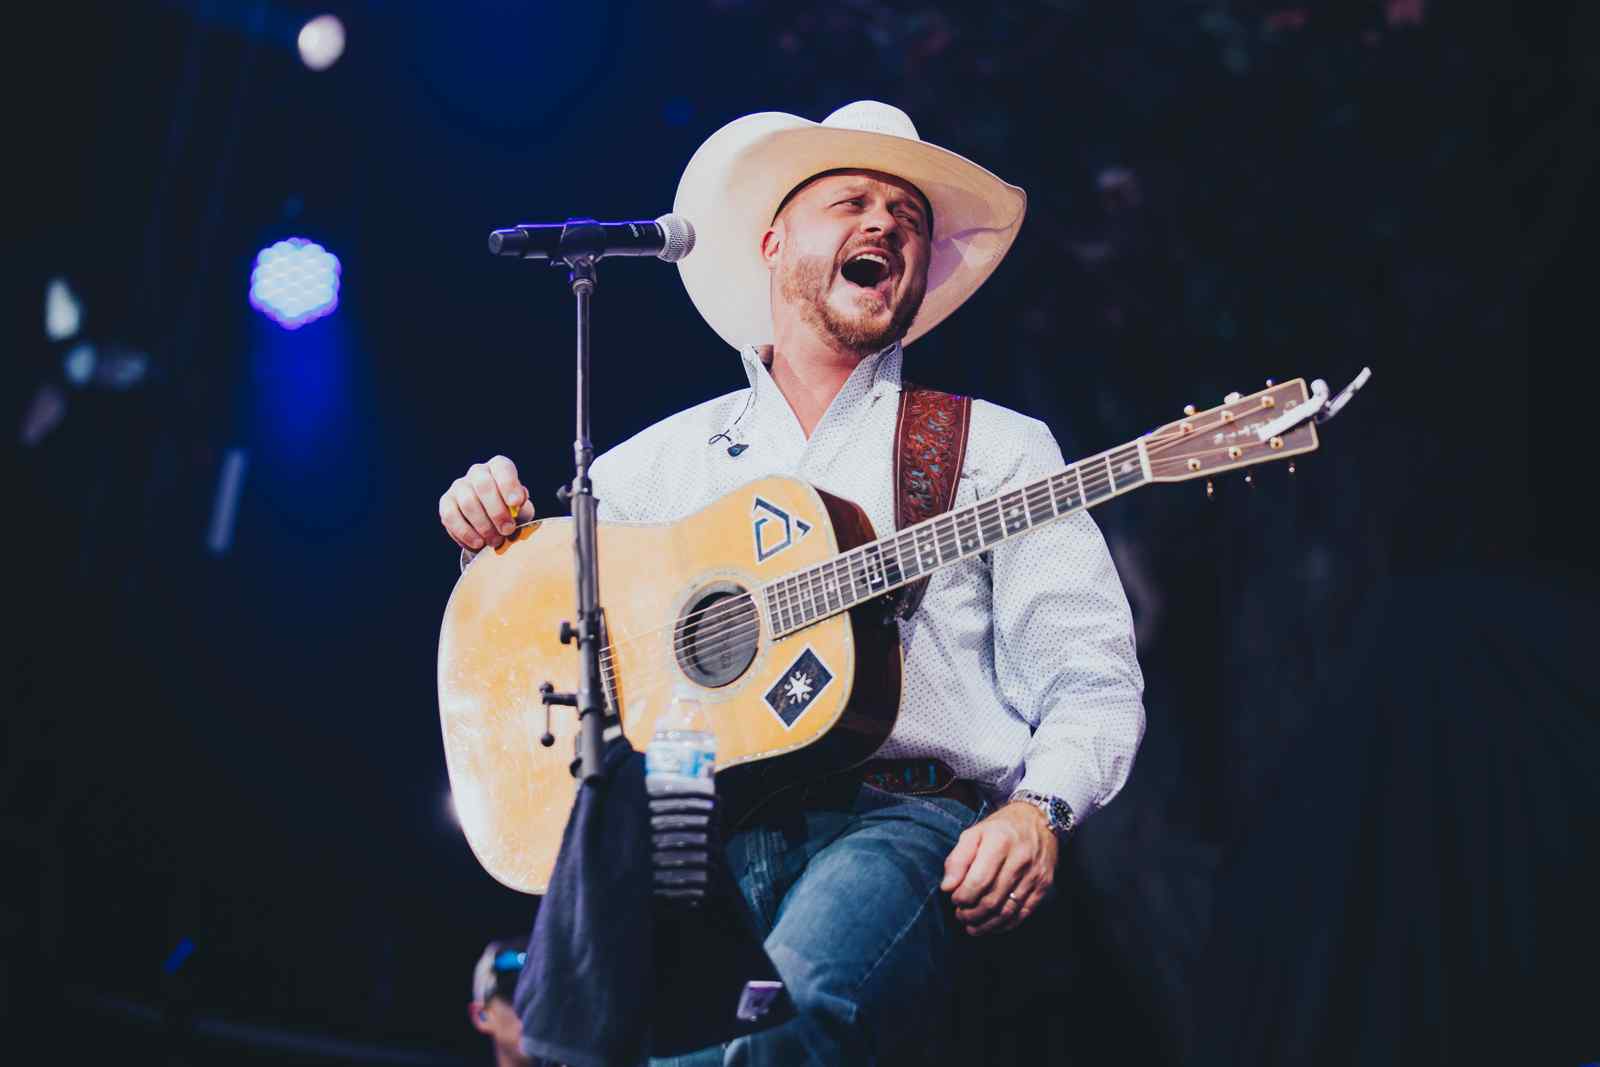 Cody Johnson Performs “Human” on Today Show and Entertains Fans at Citi Field as part of Zac Brown Band’s “Out in the Middle Tour”